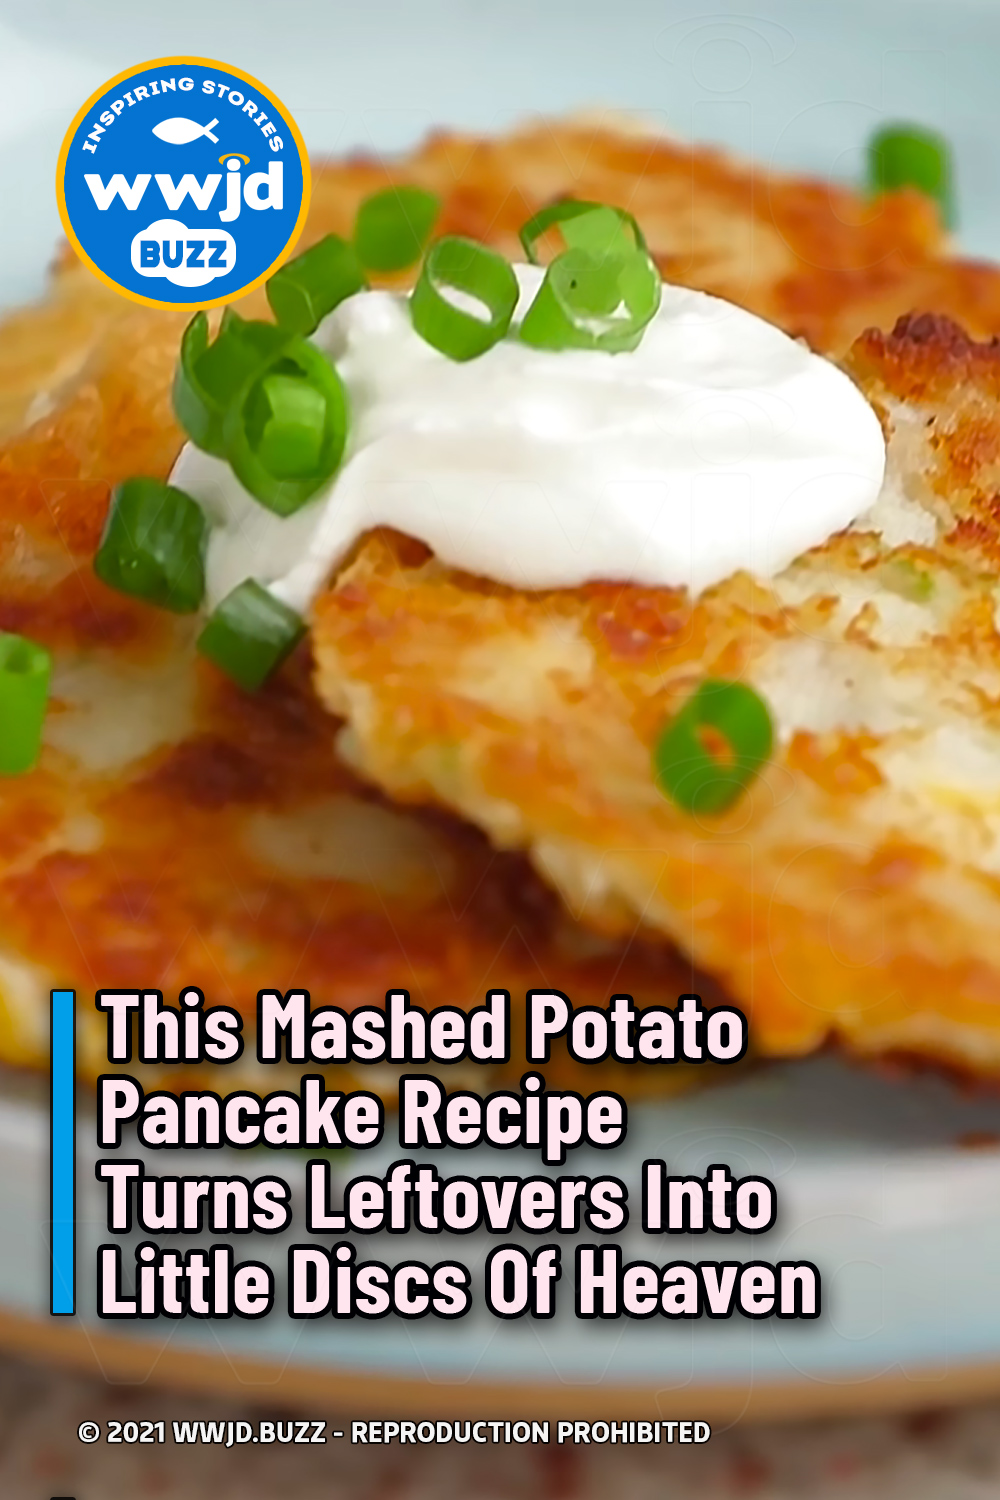 This Mashed Potato Pancake Recipe Turns Leftovers Into Little Discs Of Heaven